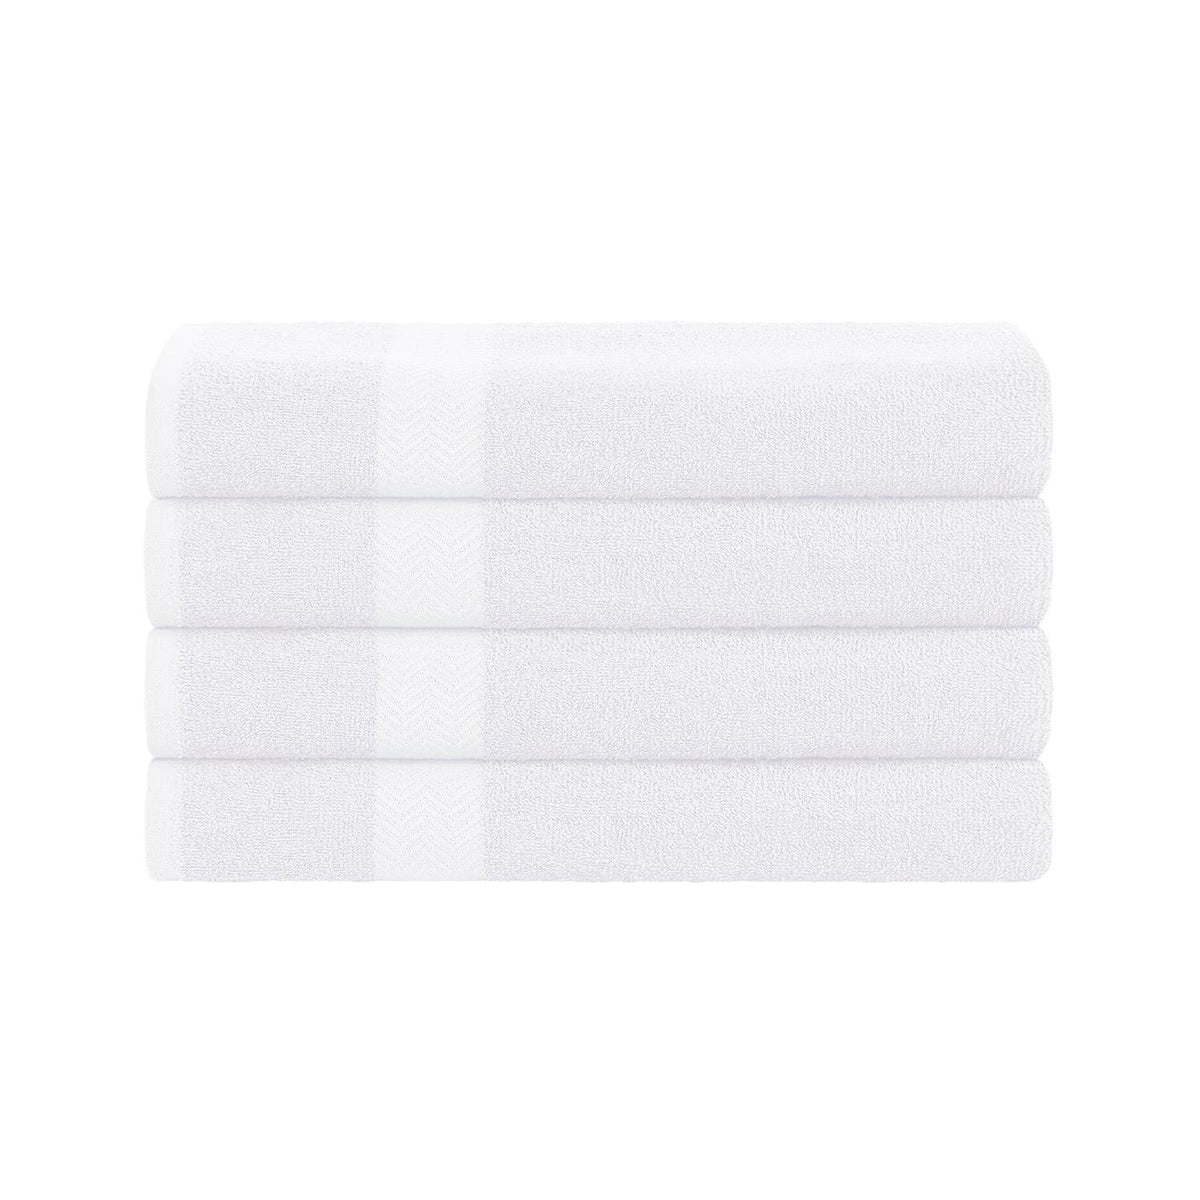 Superior Cotton 4-Piece Bath Towels Set Highly Absorbent Eco-Friendly Quick Dry - White